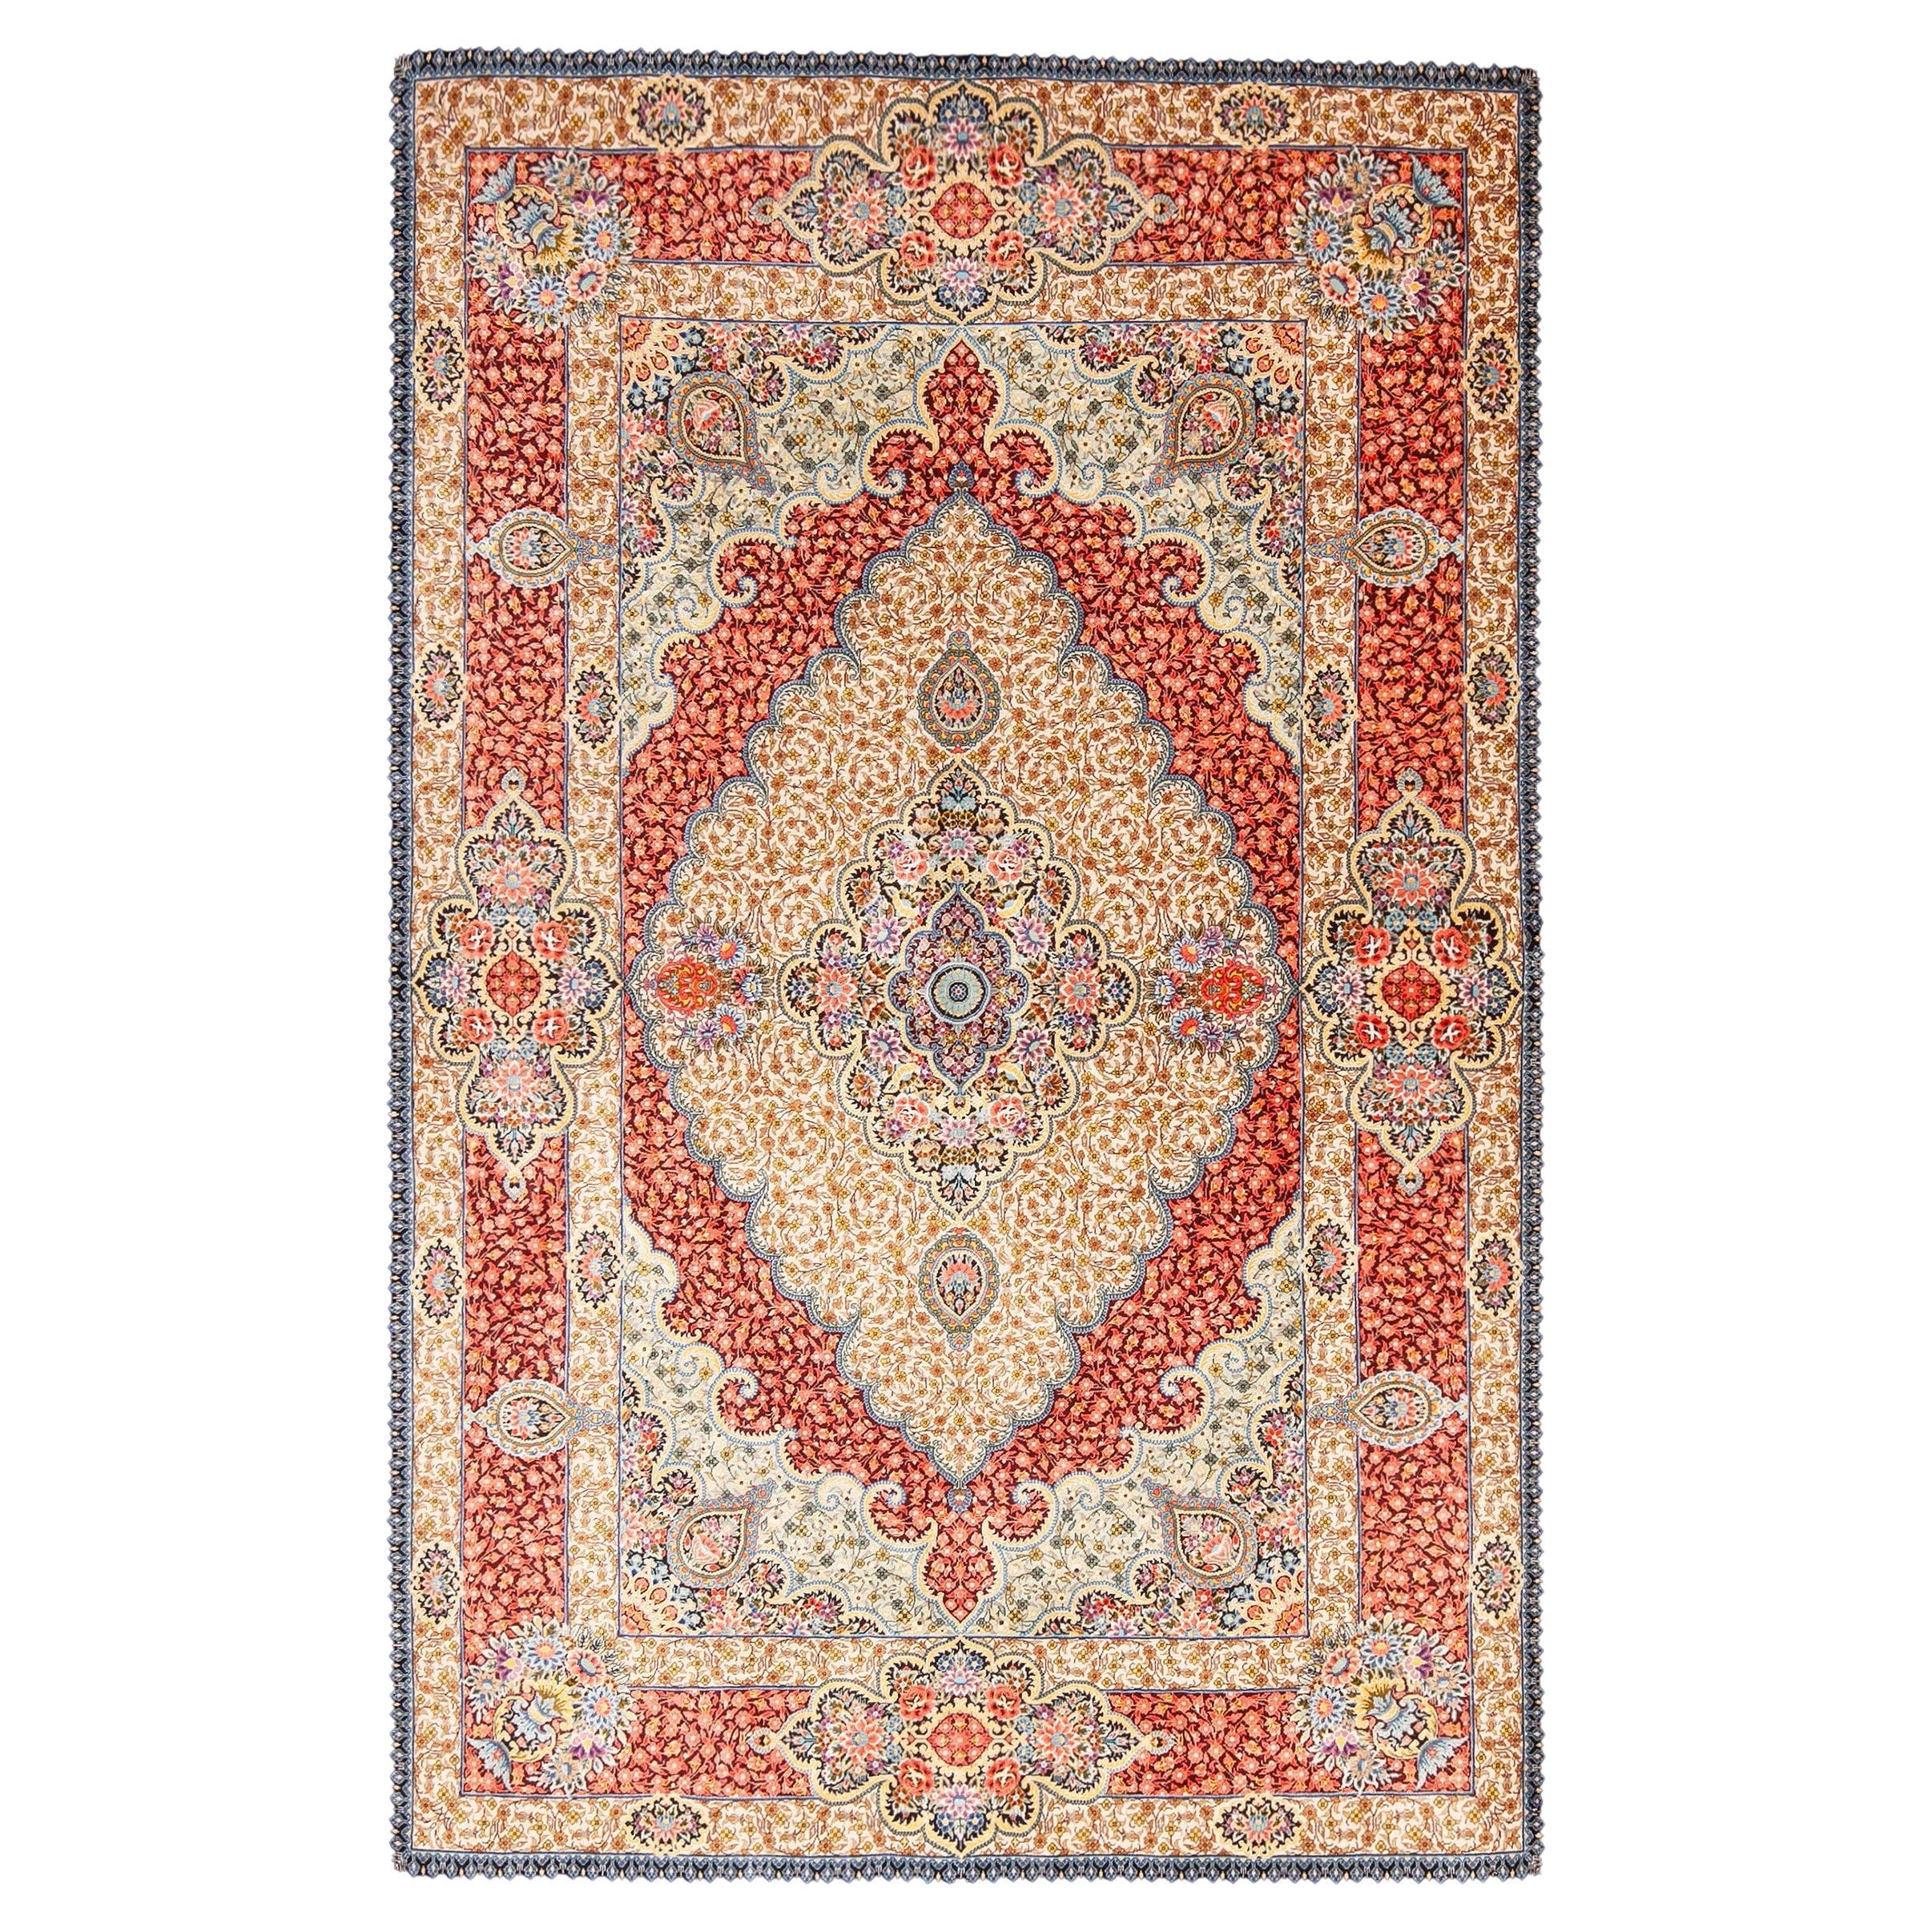 Gorgeous Small Fine Luxurious Floral Vintage Persian Silk Qum Rug 3'8" x 5'7" For Sale